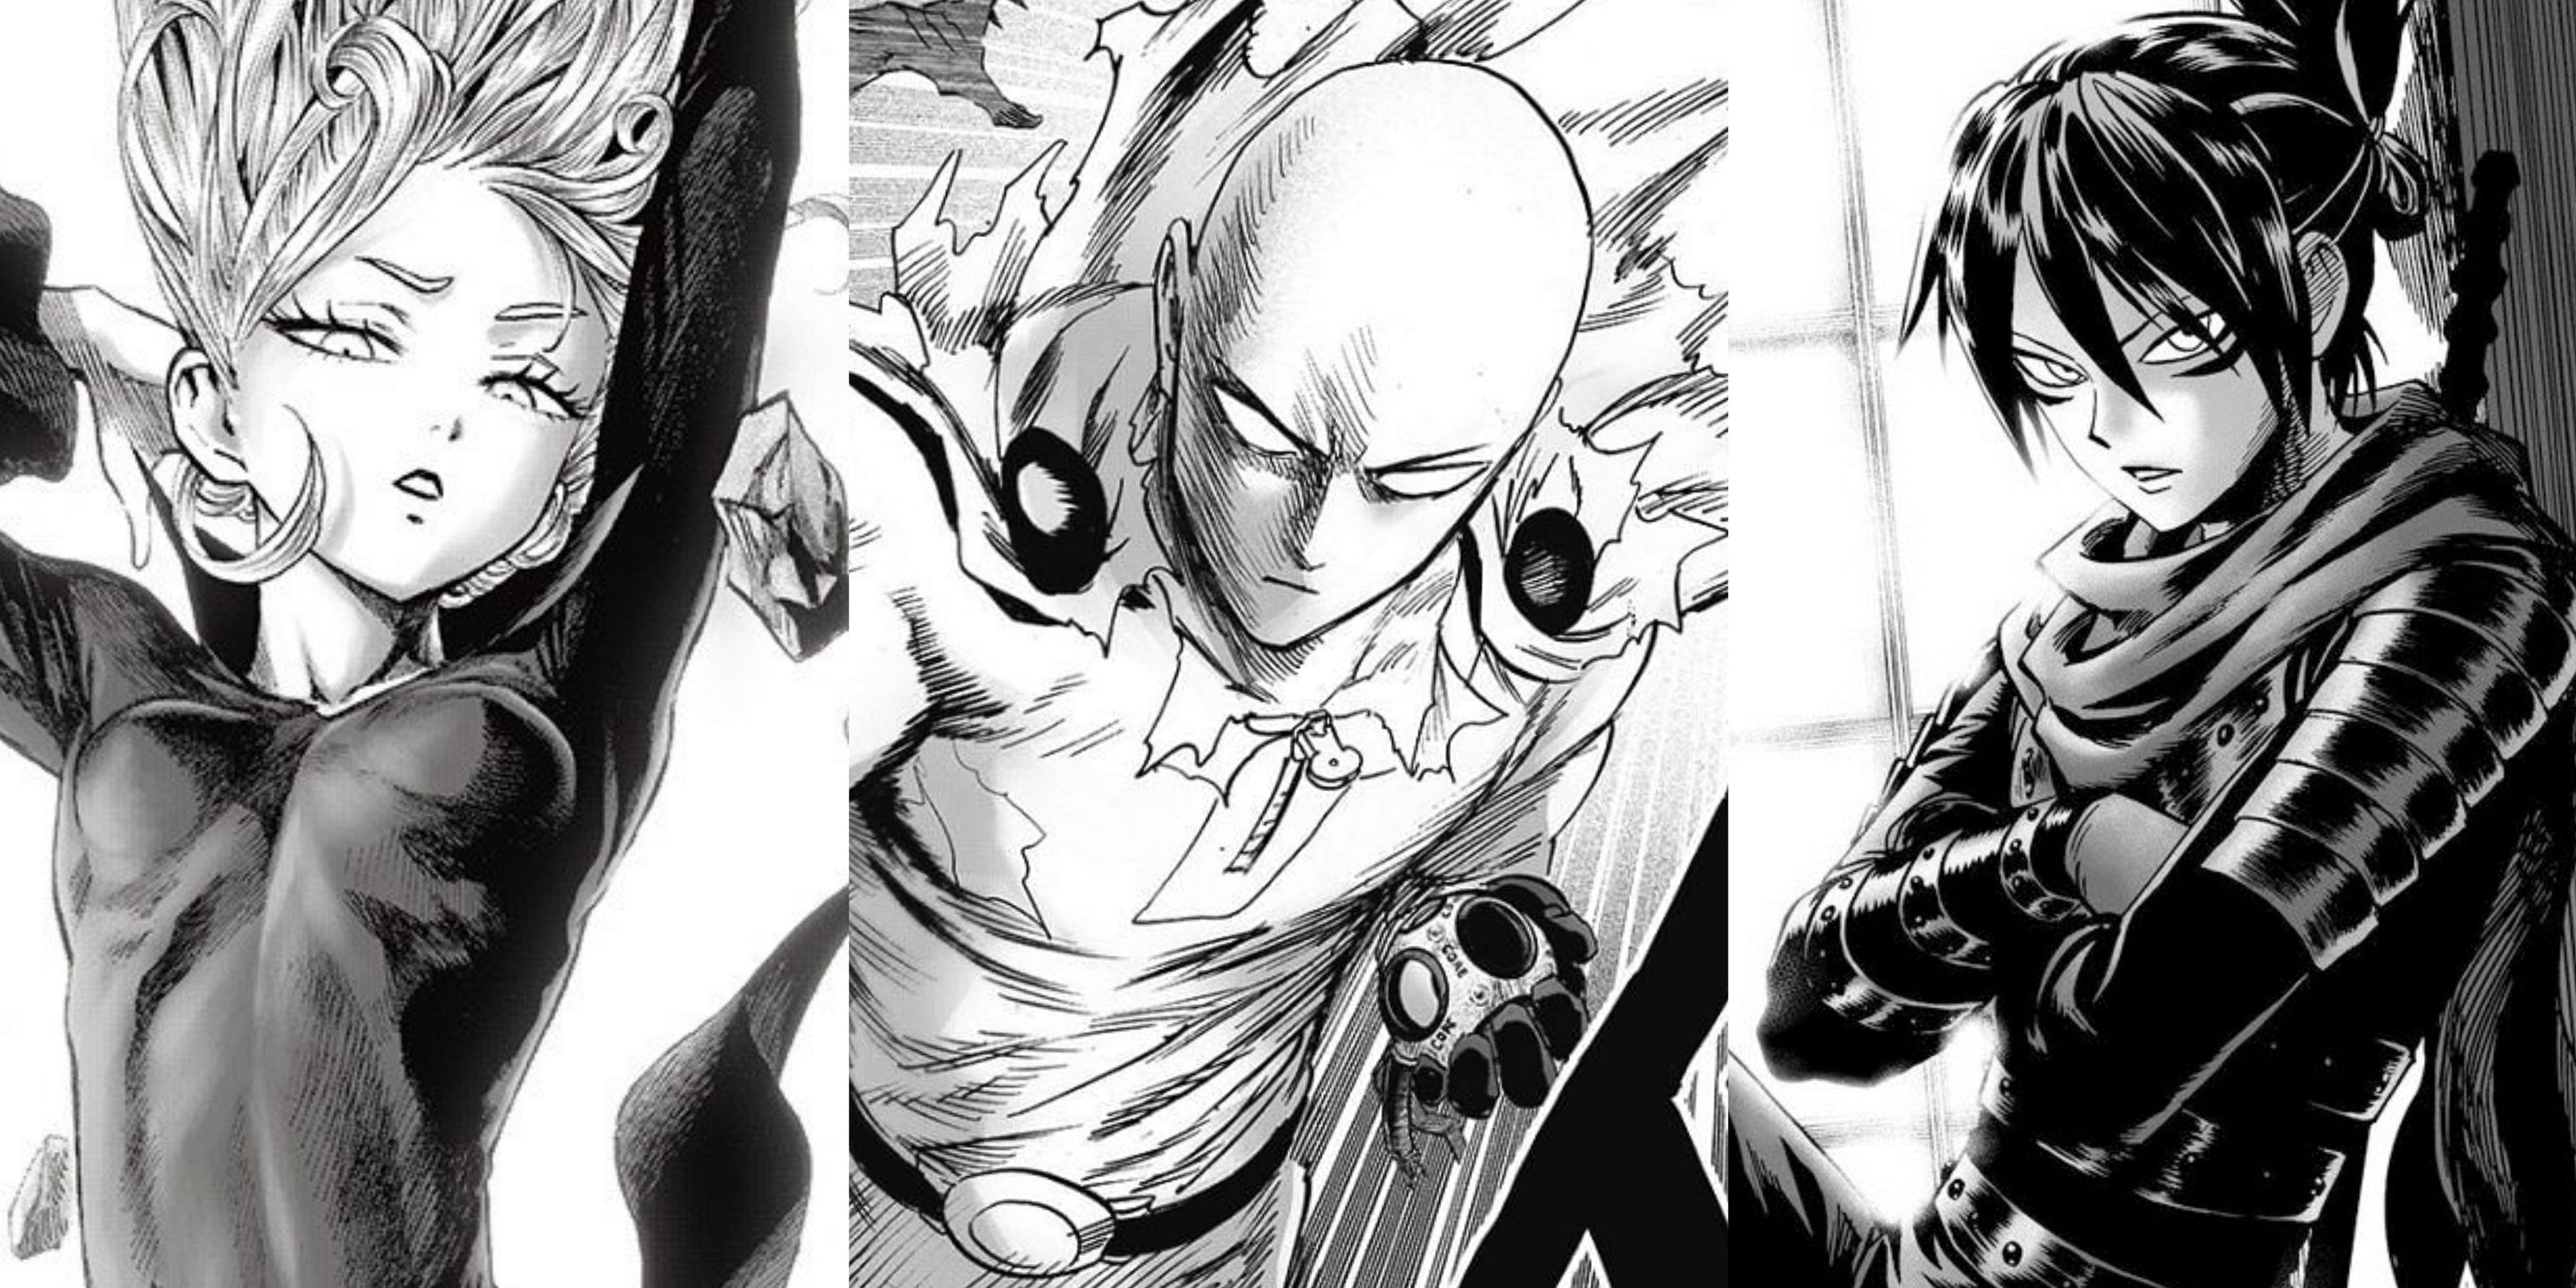 KING SHOW  One punch man manga, One punch man heroes, One punch man king